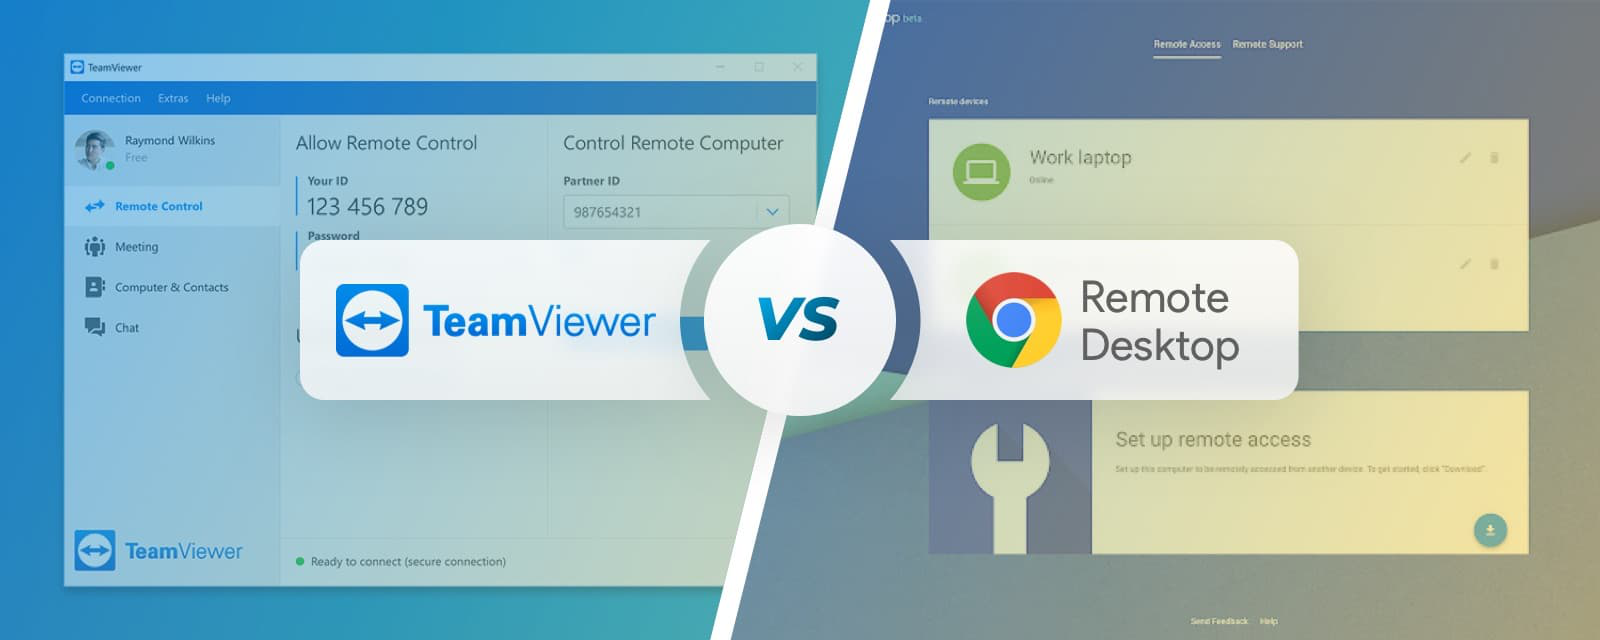 Overview of Chrome Remote Desktop and TeamViewer